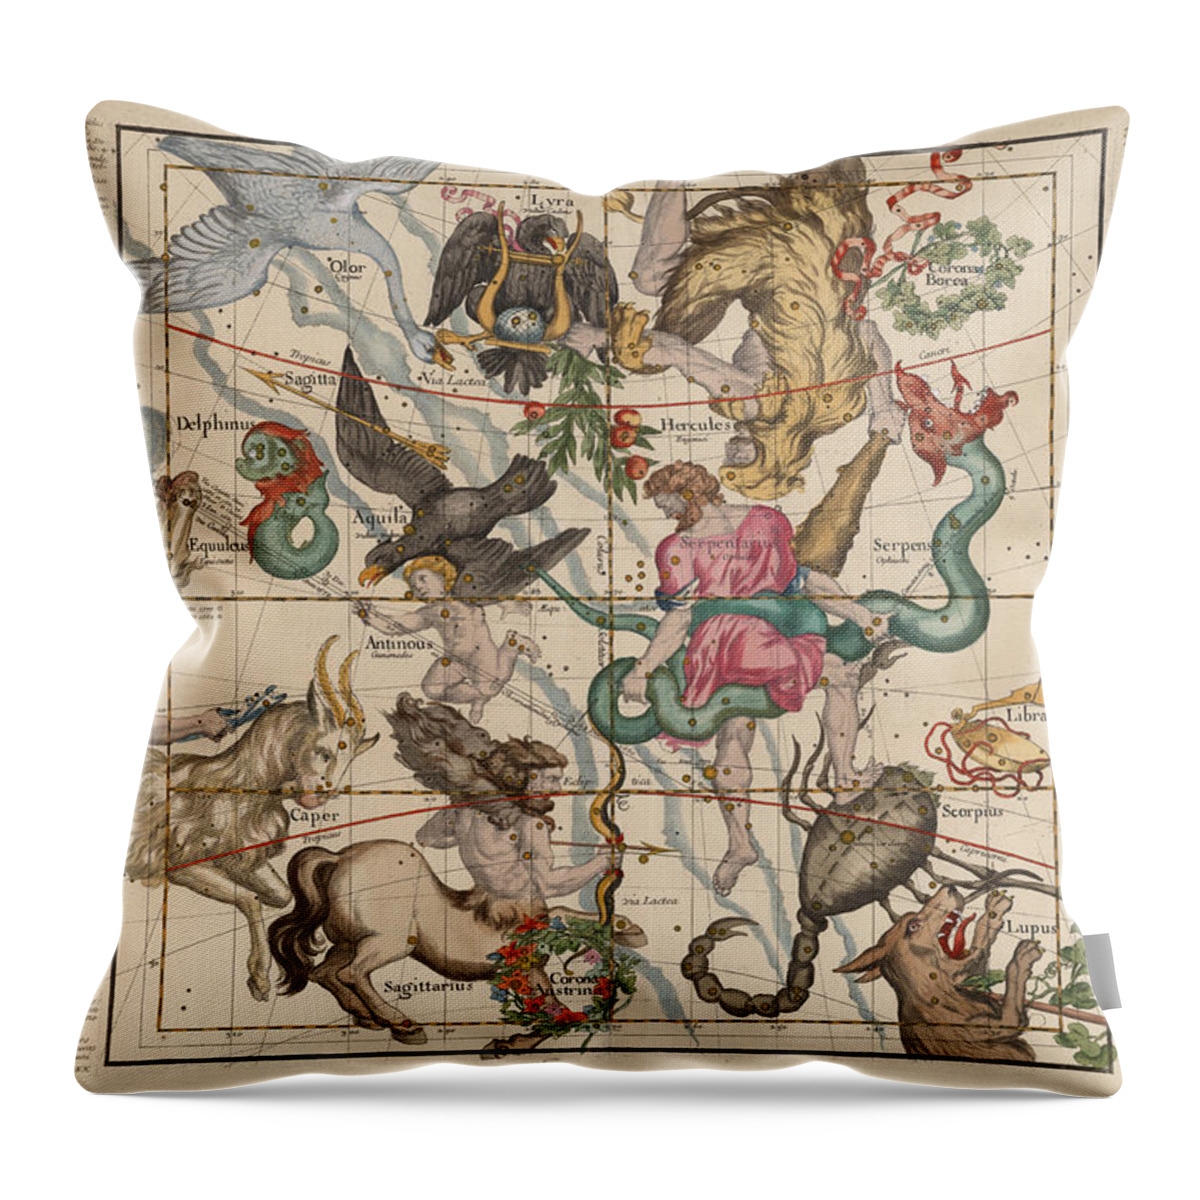 Constellations Map Throw Pillow featuring the drawing Map of the Constellations Hercules, Sagittarius, Scorpius, Libra - Celestial Map - Antique map by Studio Grafiikka